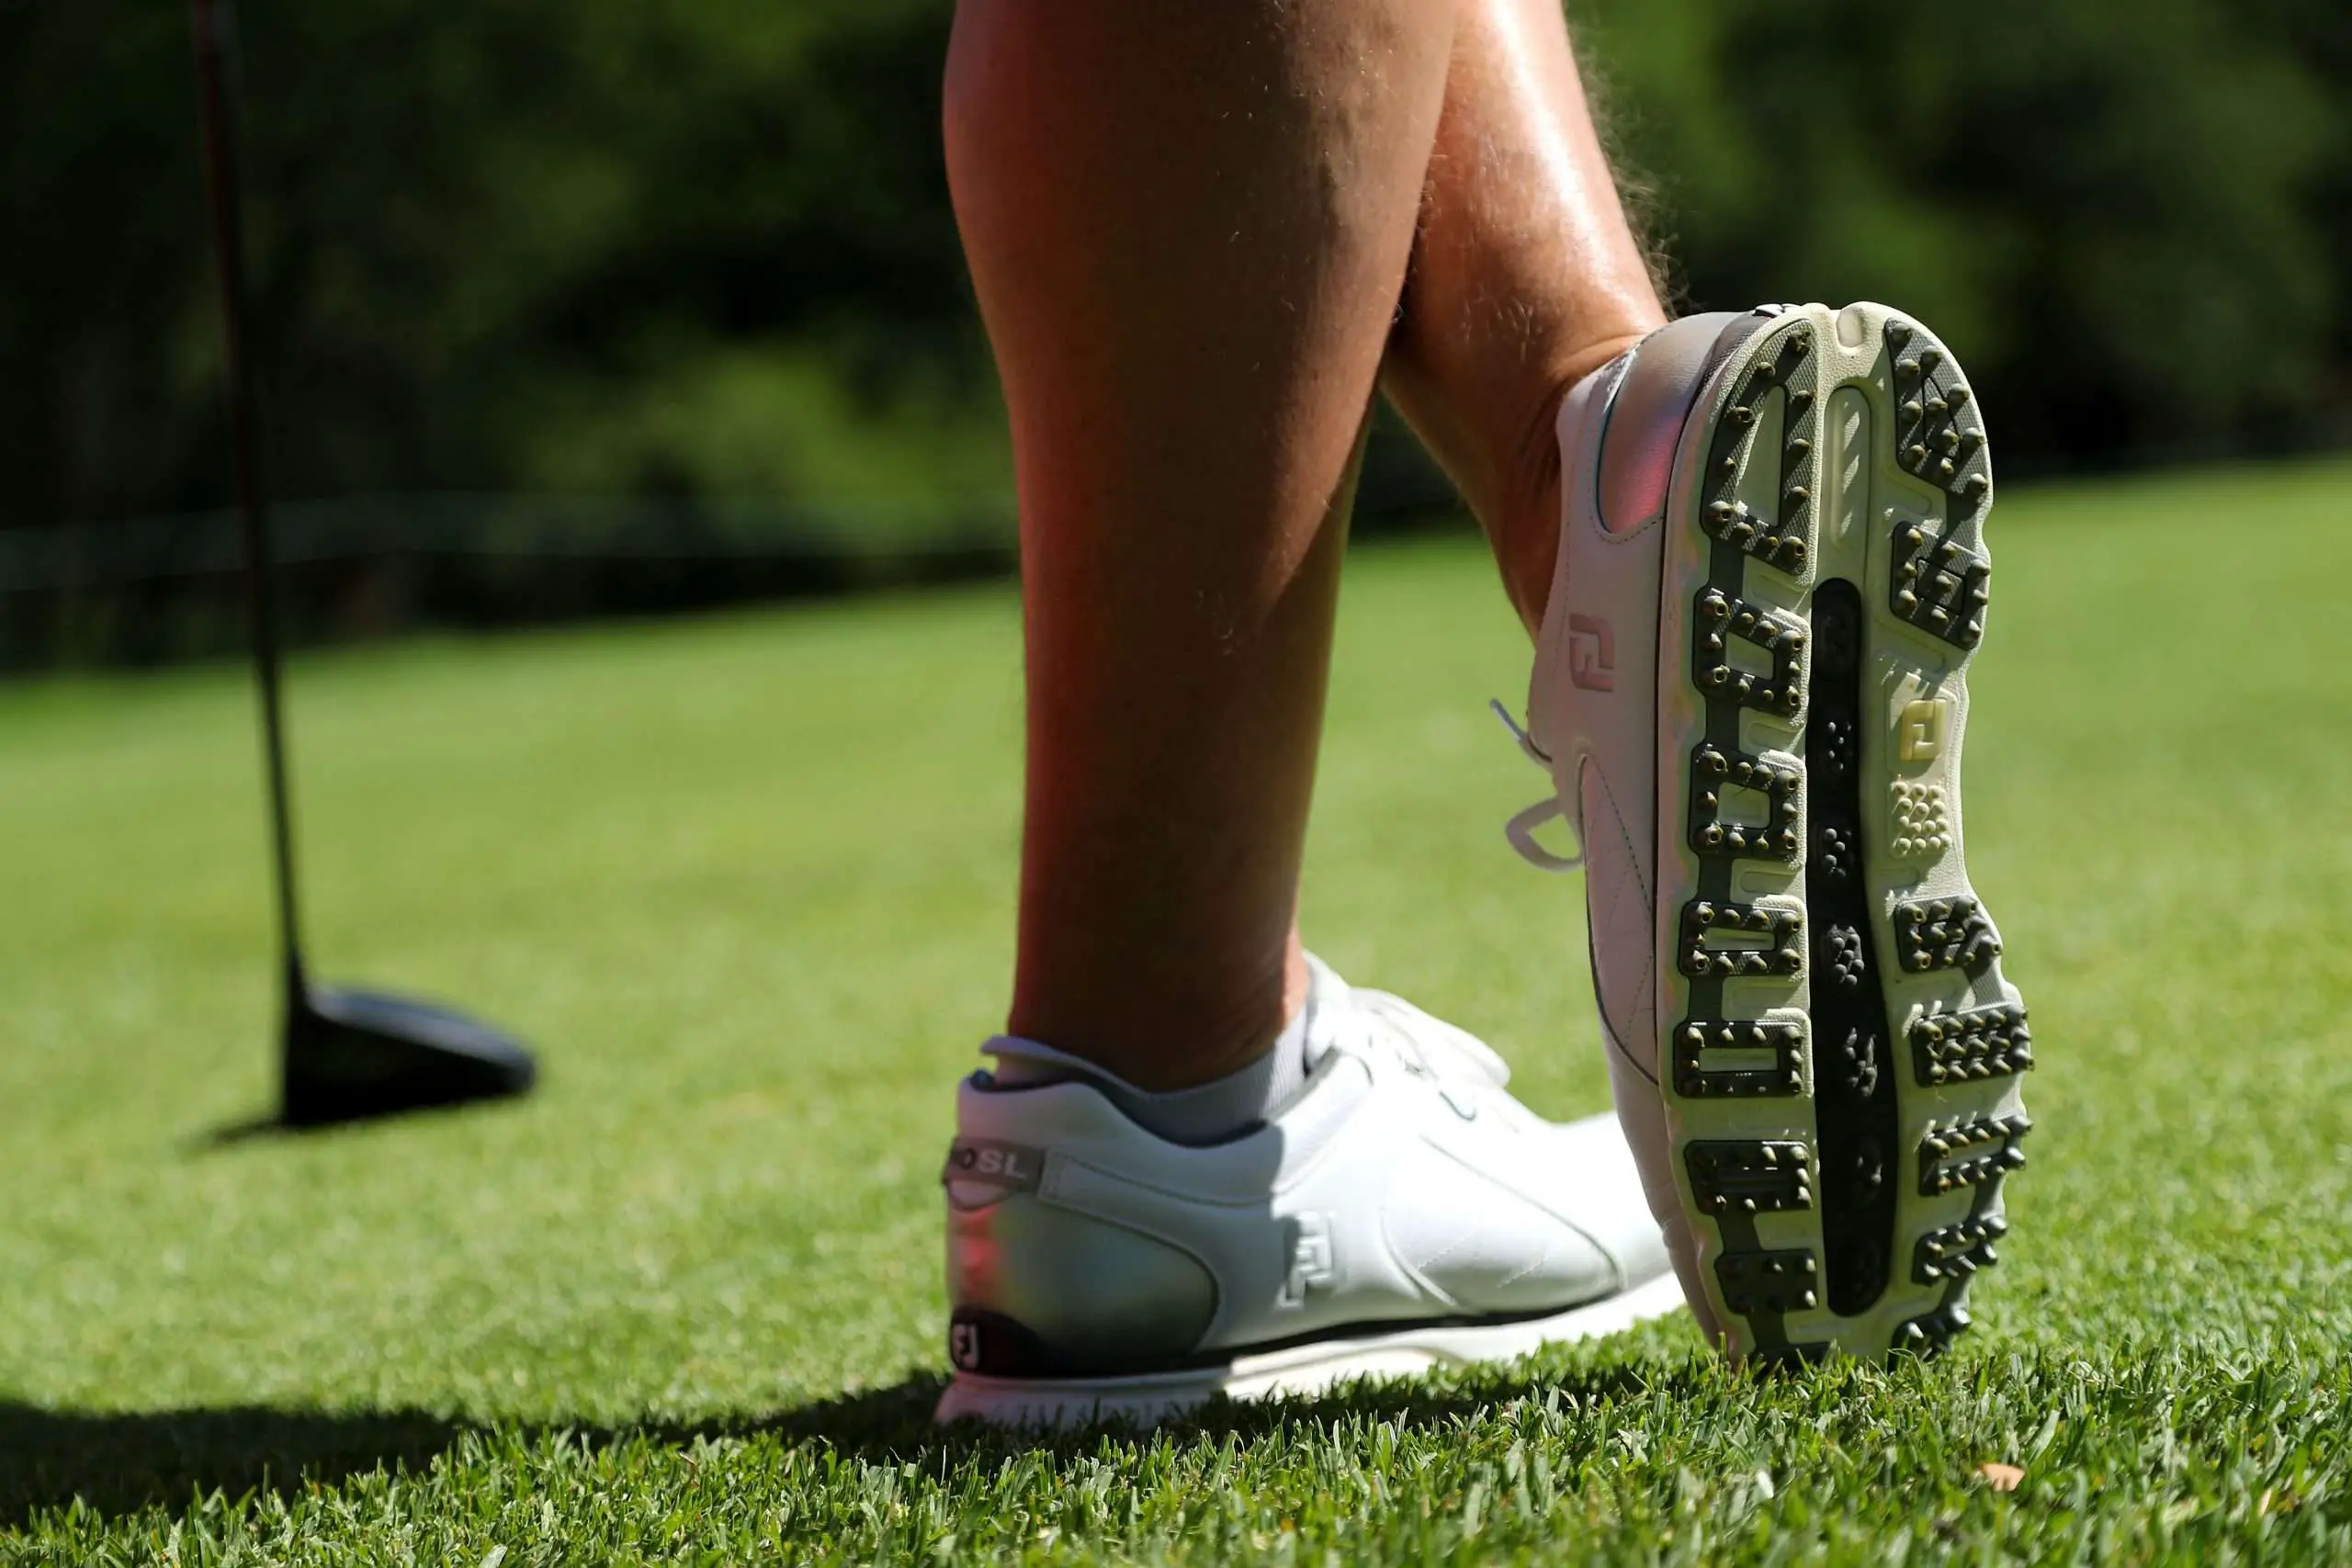 New Golf Shoes: The Latest Footwear for the Links